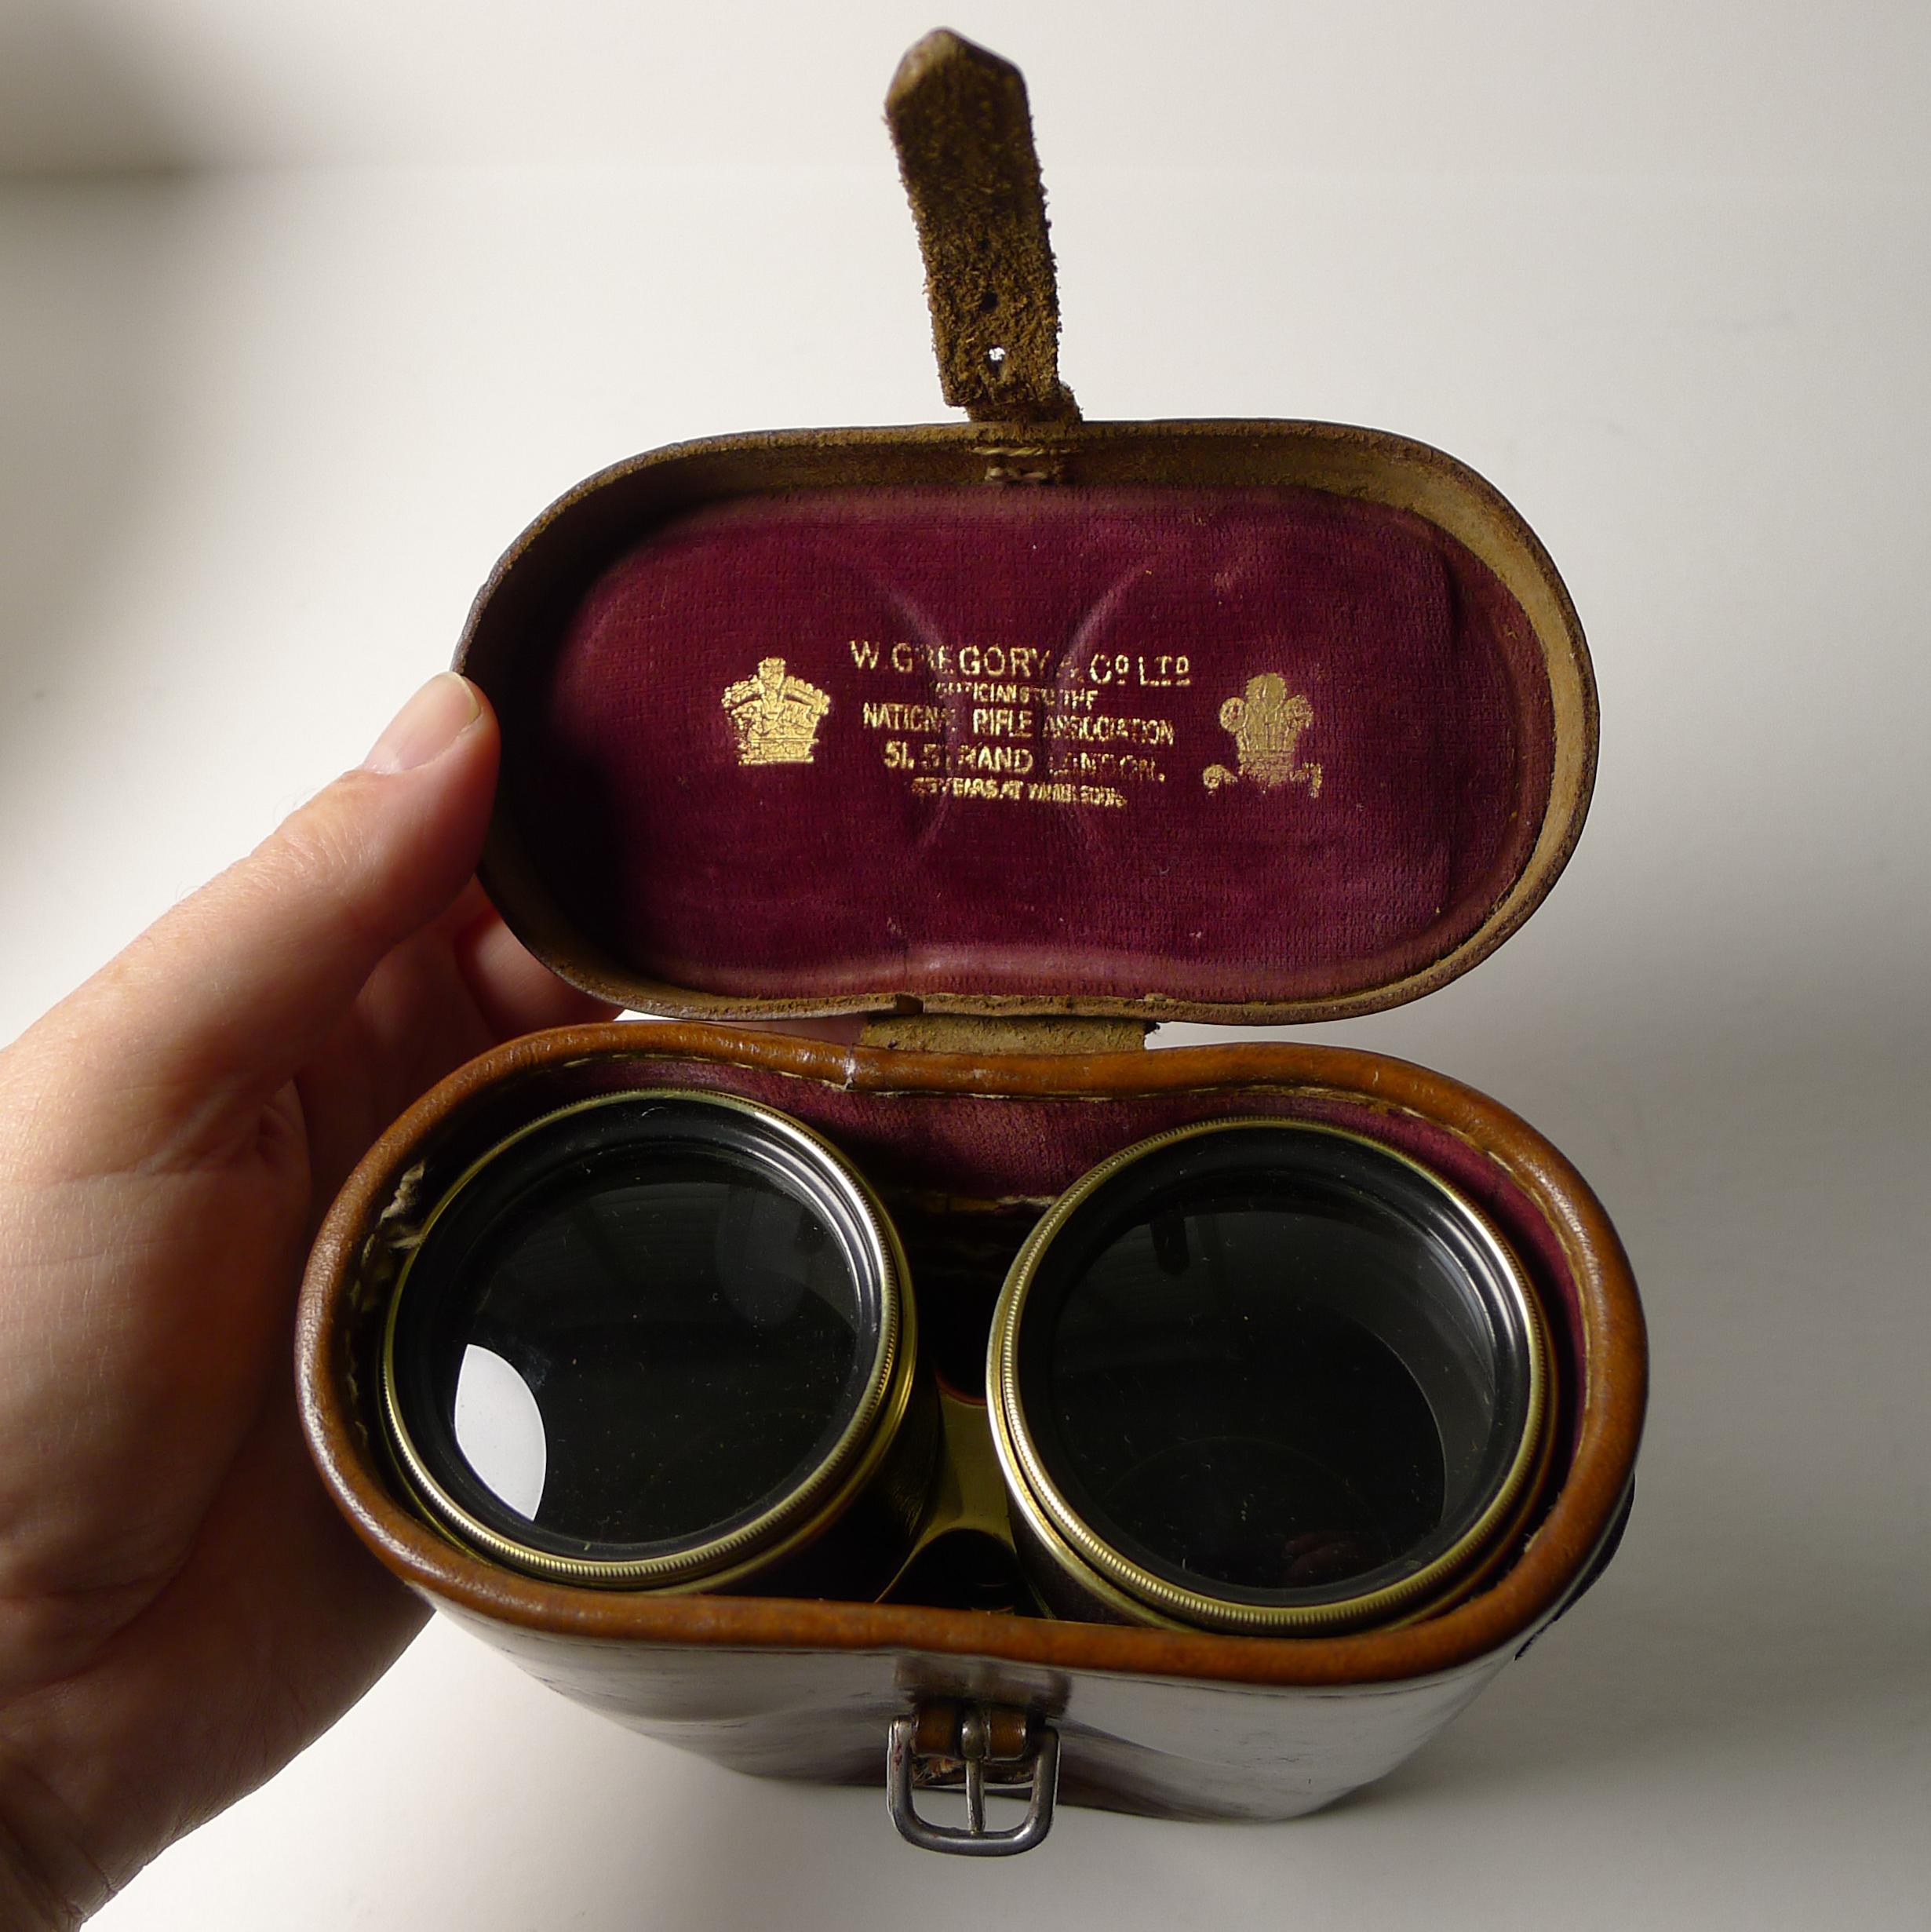 A superb pair of antique binoculars made from brass and clad in leather, meticulously and professionally cleaned and polished, restoring them to their former glory. They have integral sun shades which are pulled out manually when required.

The